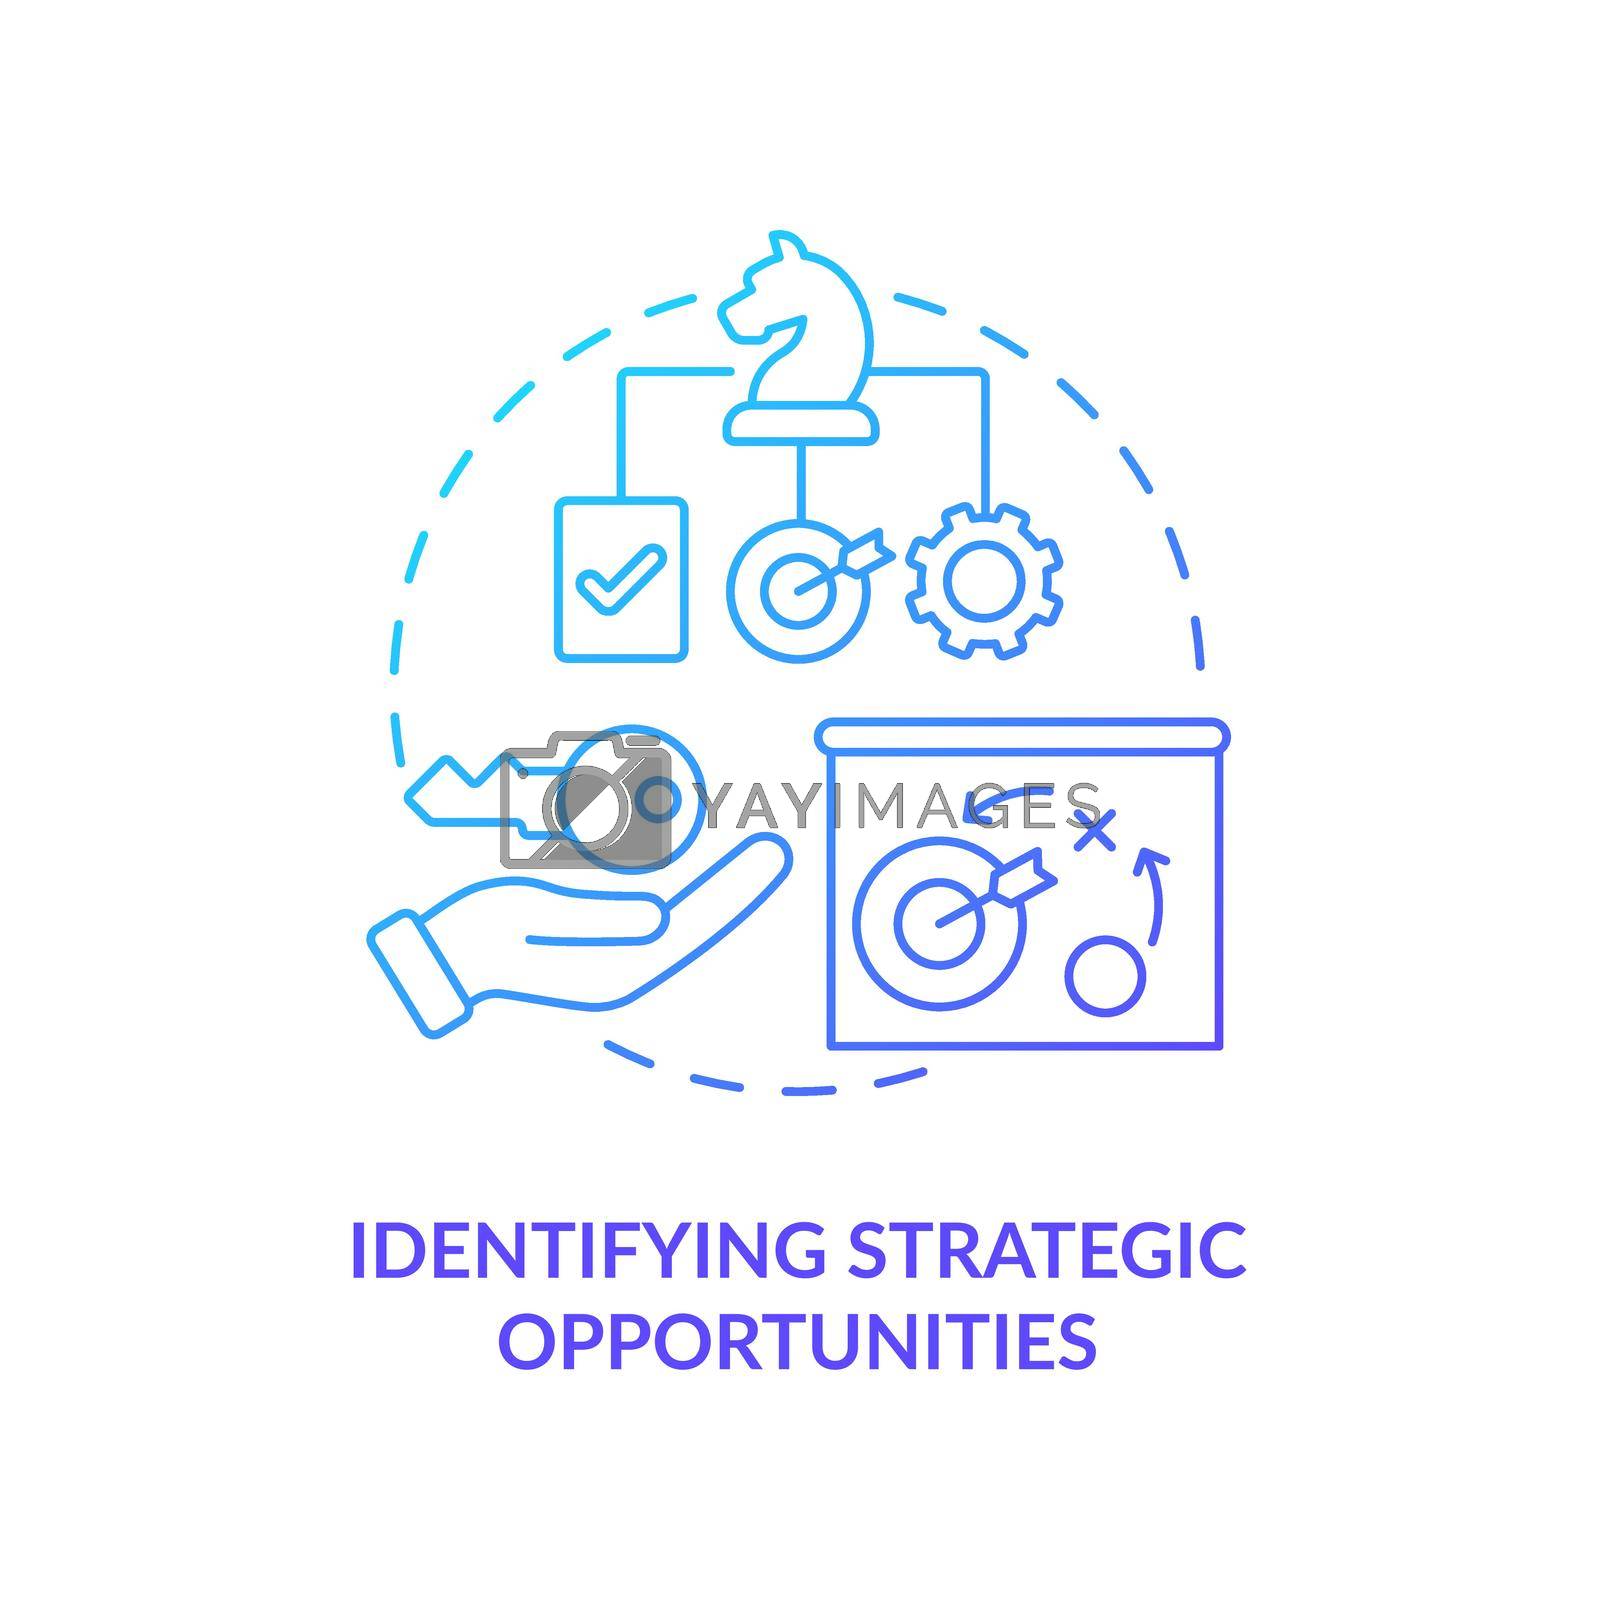 Royalty free image of Identifying strategic opportunities blue gradient concept icon by bsd